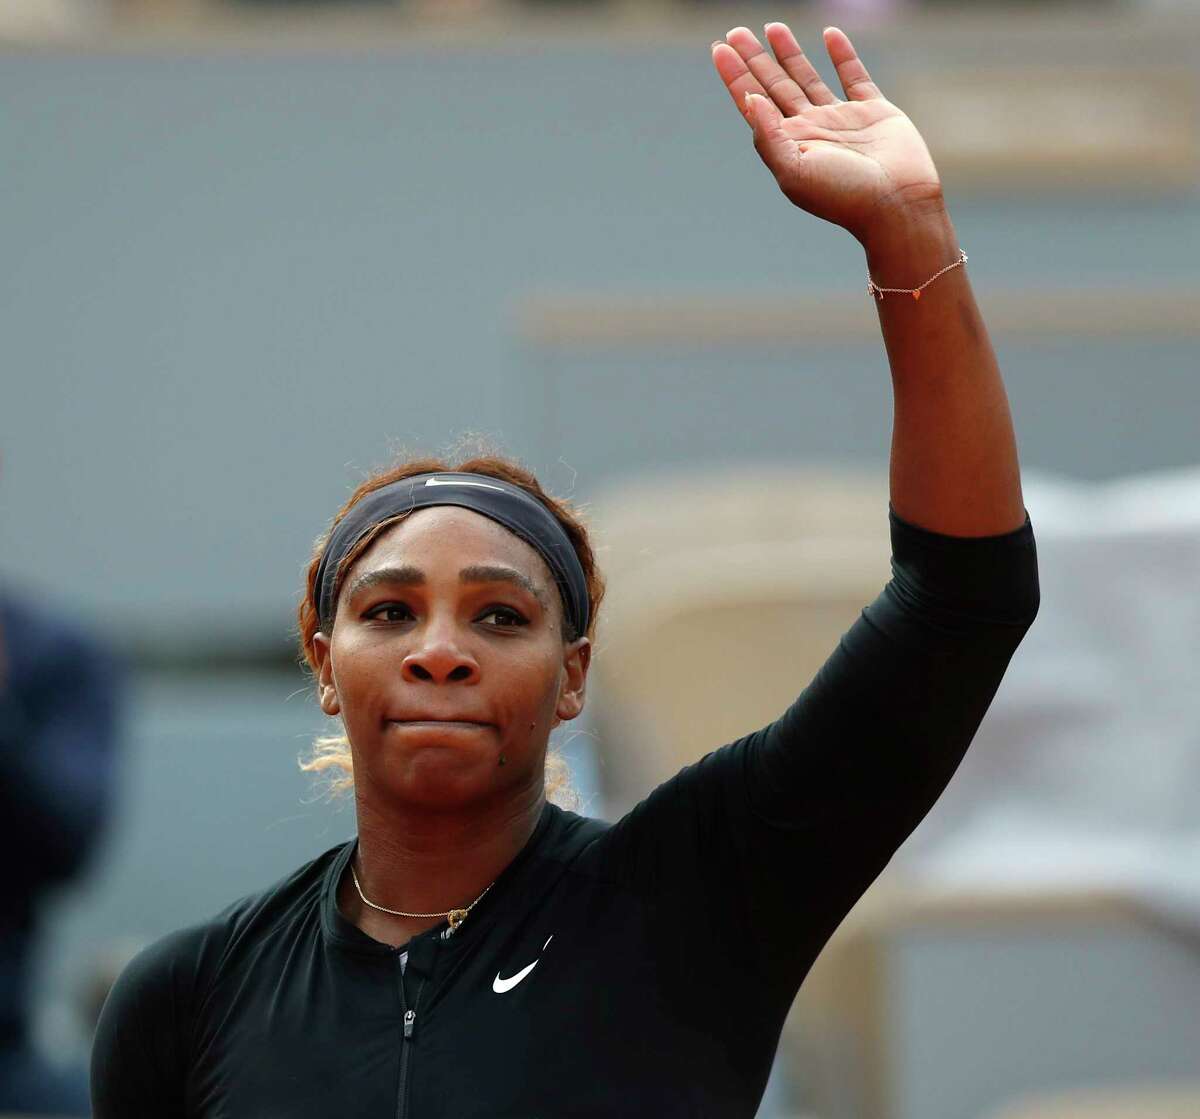 Serena Williams of the U.S. celebrates winning her first round match of the French Open tennis tournament against Vitalia Diatchenko of Russia in three sets 2-6, 6-1, 6-0, at the Roland Garros stadium in Paris, Monday, May 27, 2019. (AP Photo/Pavel Golovkin)